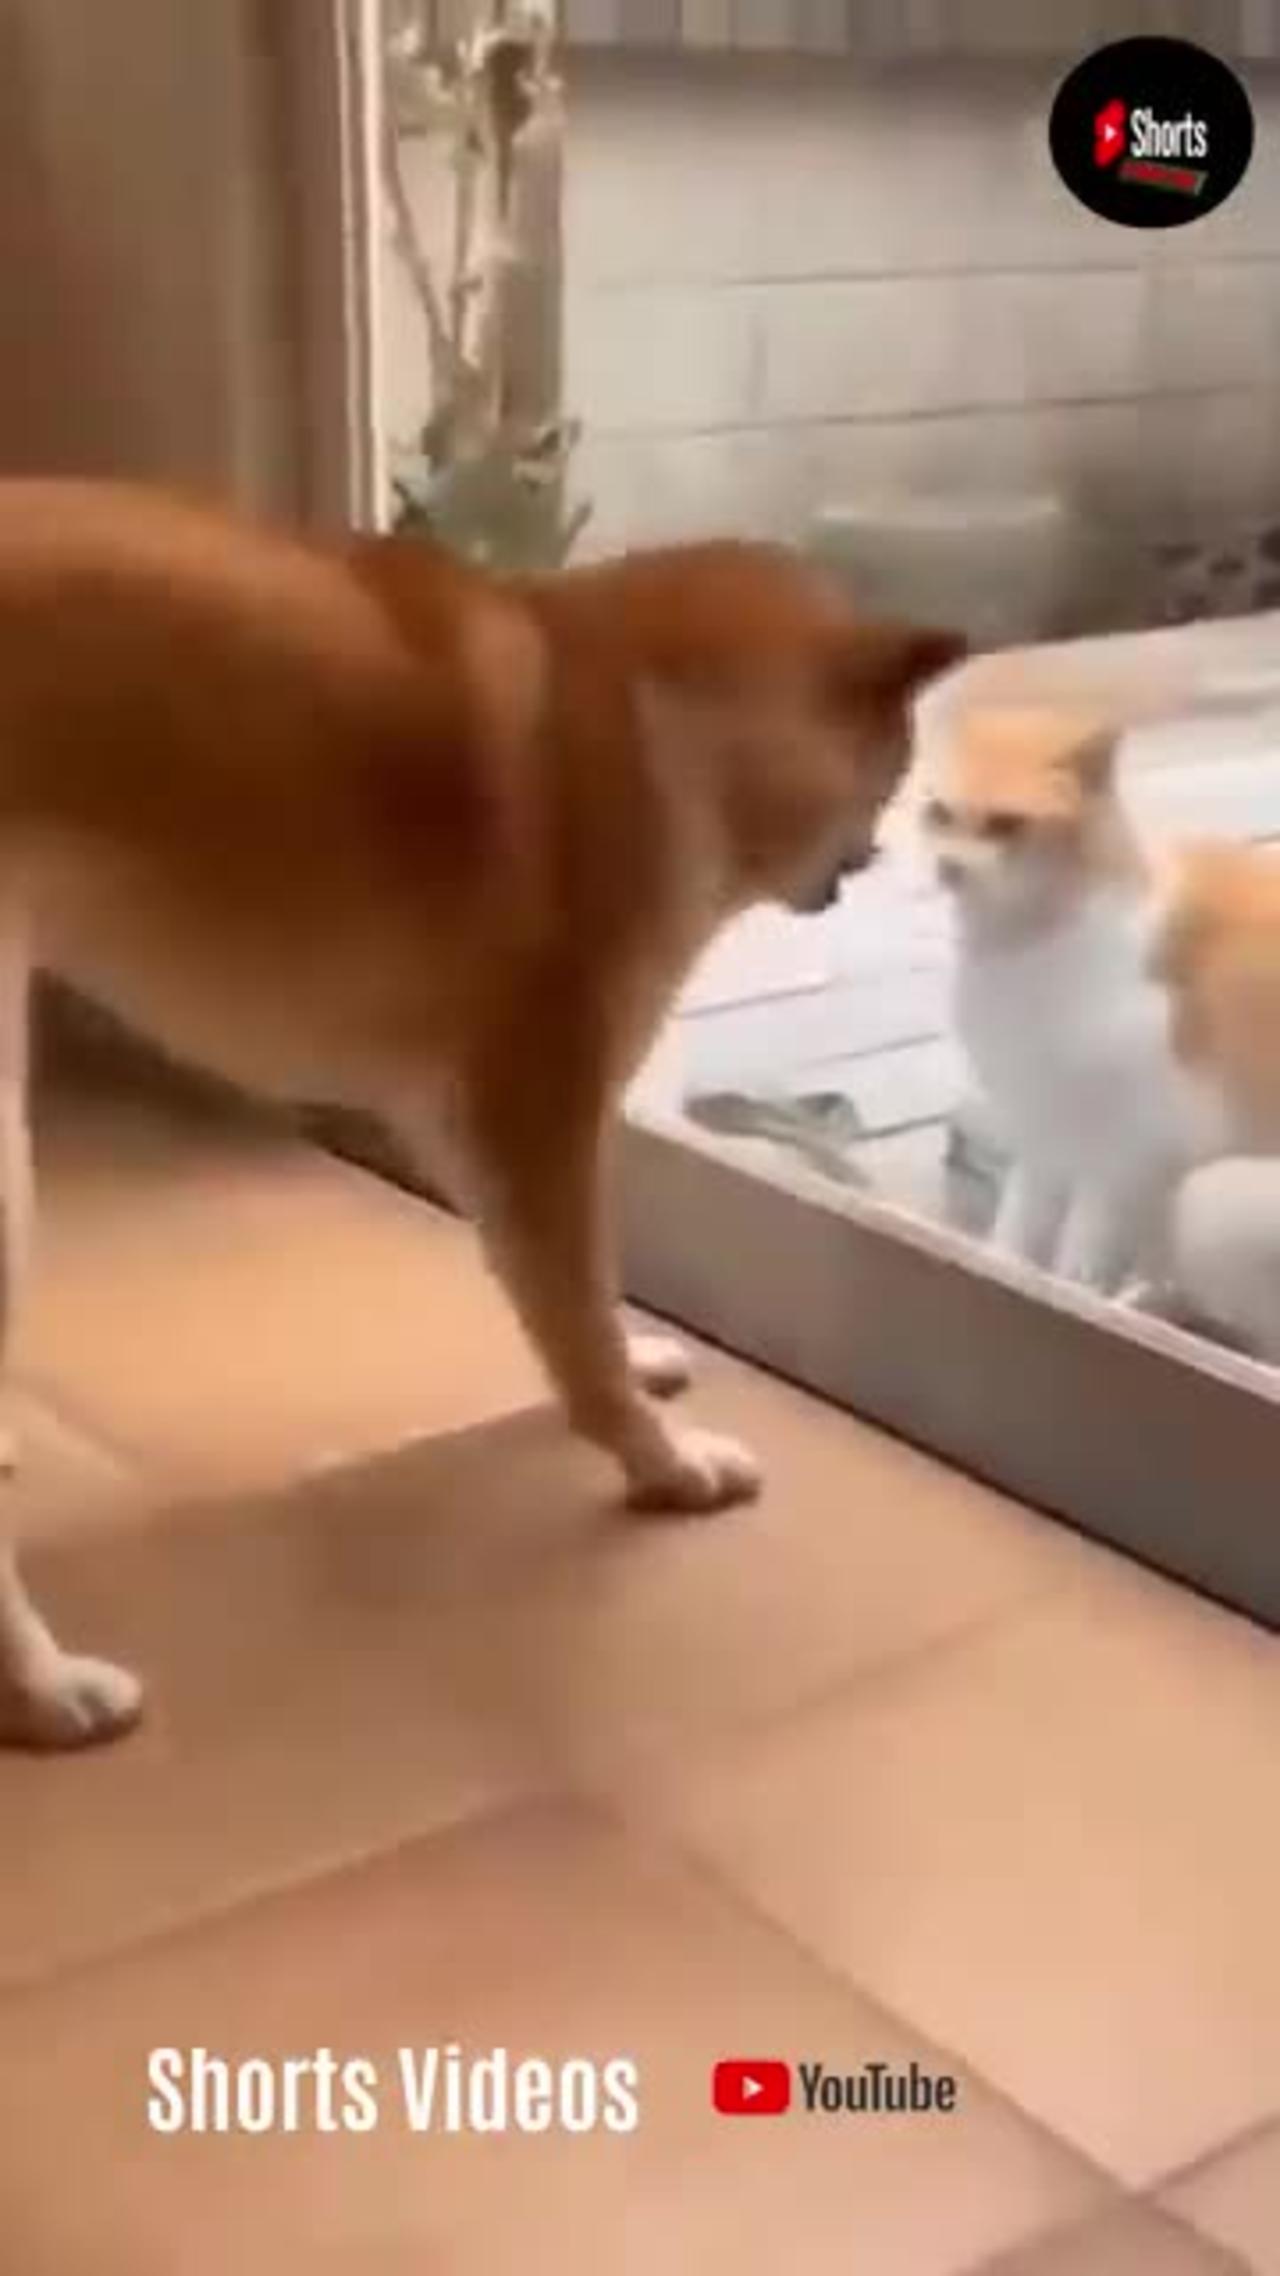 fighting Cats and Dogs, Hilarious.